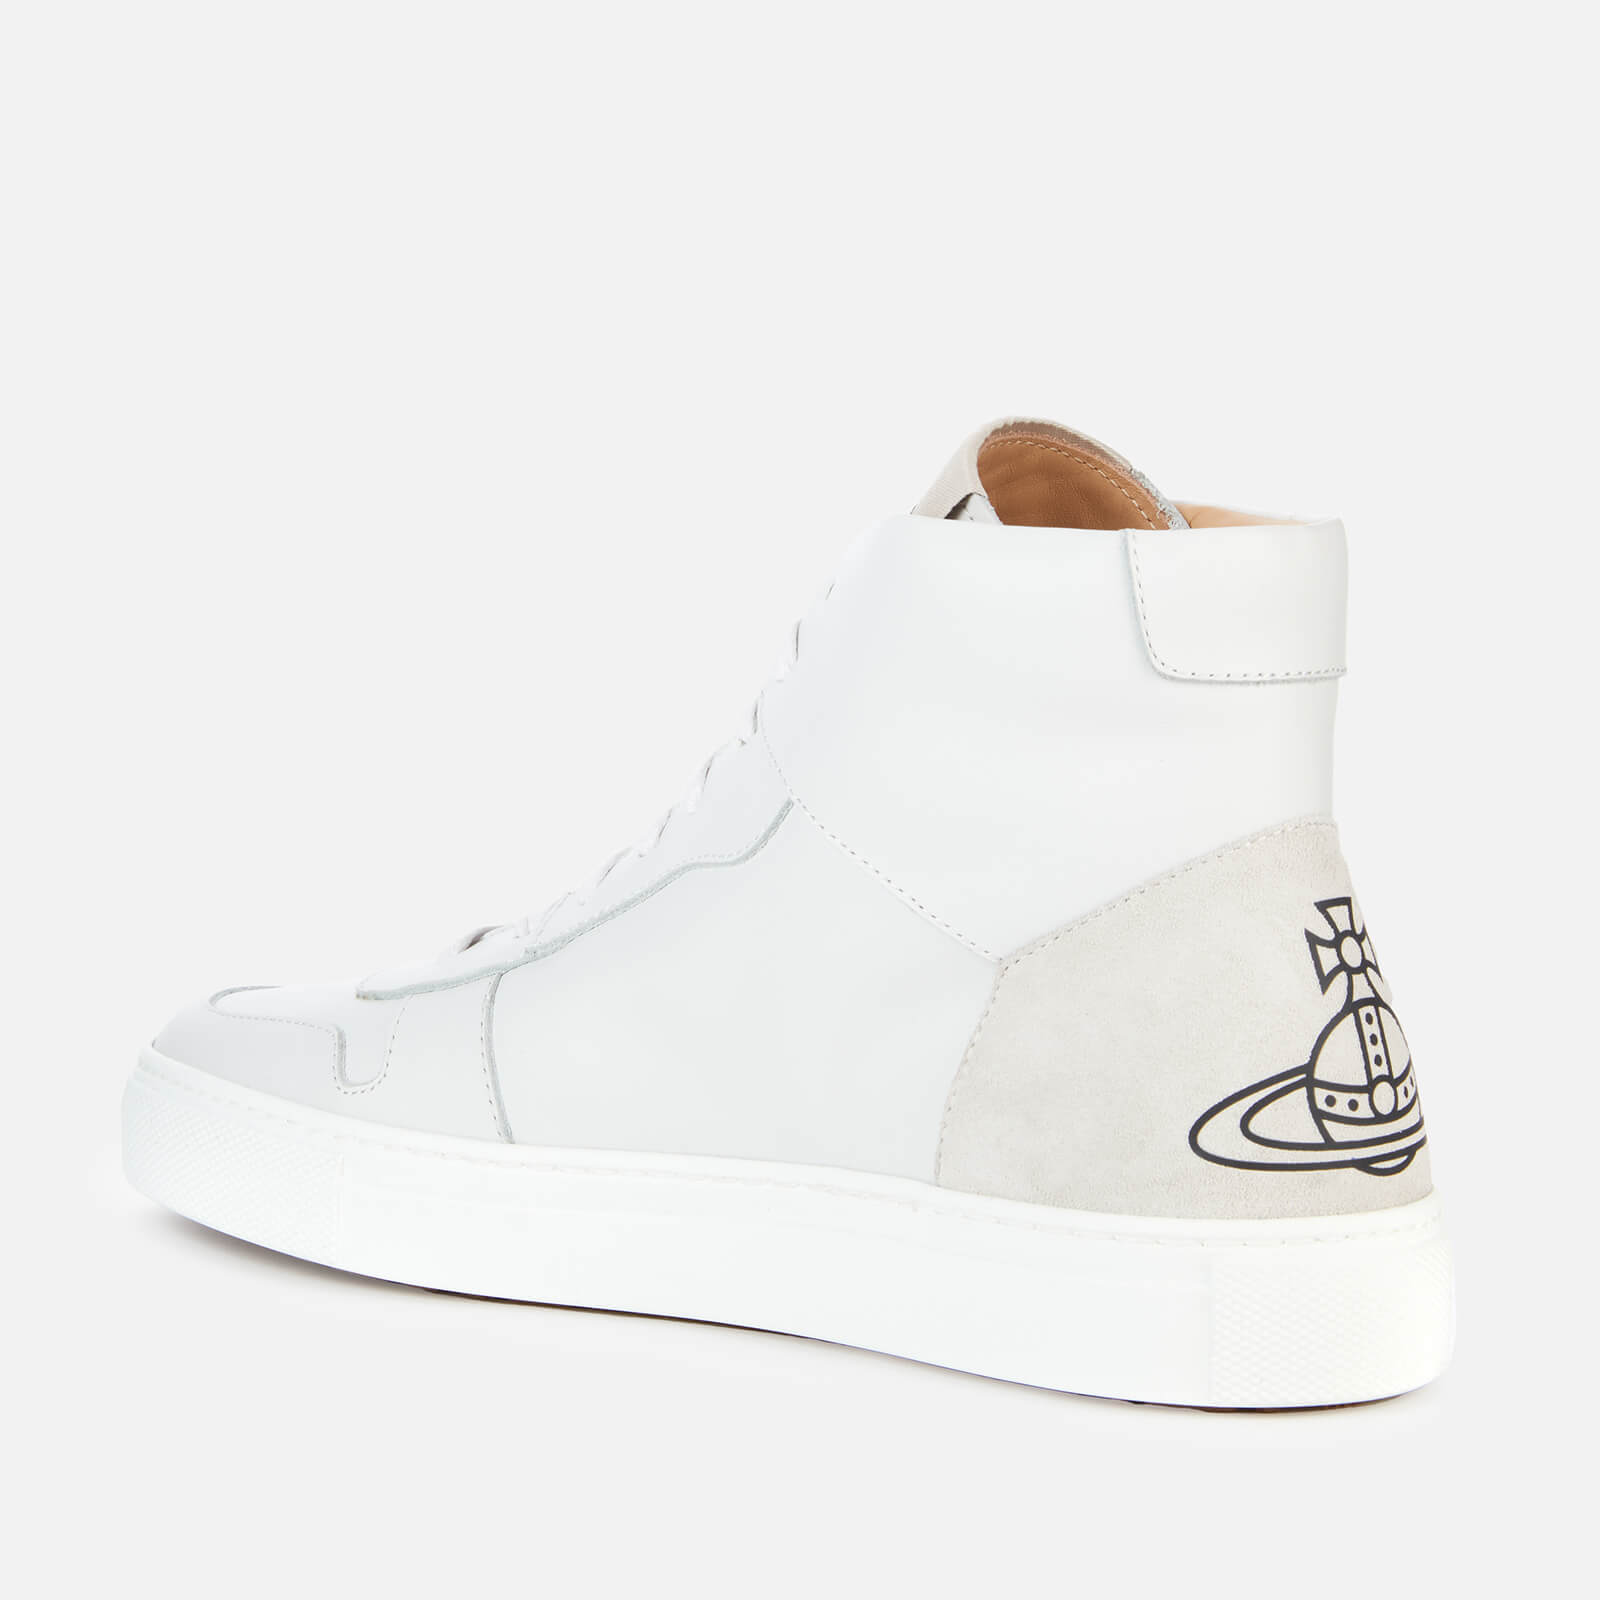 Vivienne Westwood Women's Apollo Leather Hi-top Trainers - White - Uk 7 75010003w L0005 A401 Shoes, White